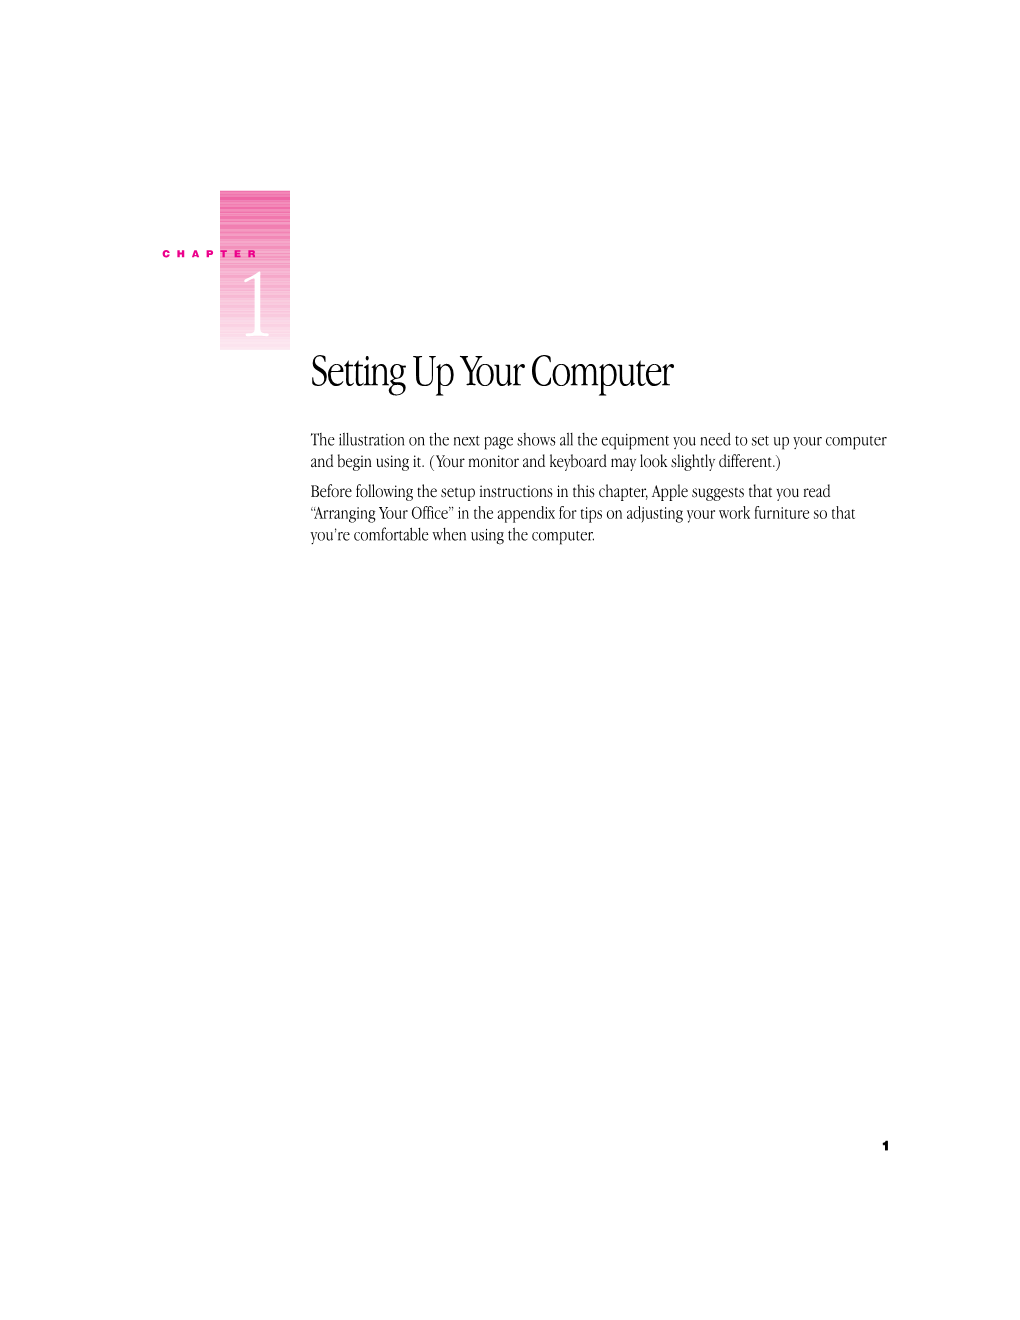 Setting up Your Computer